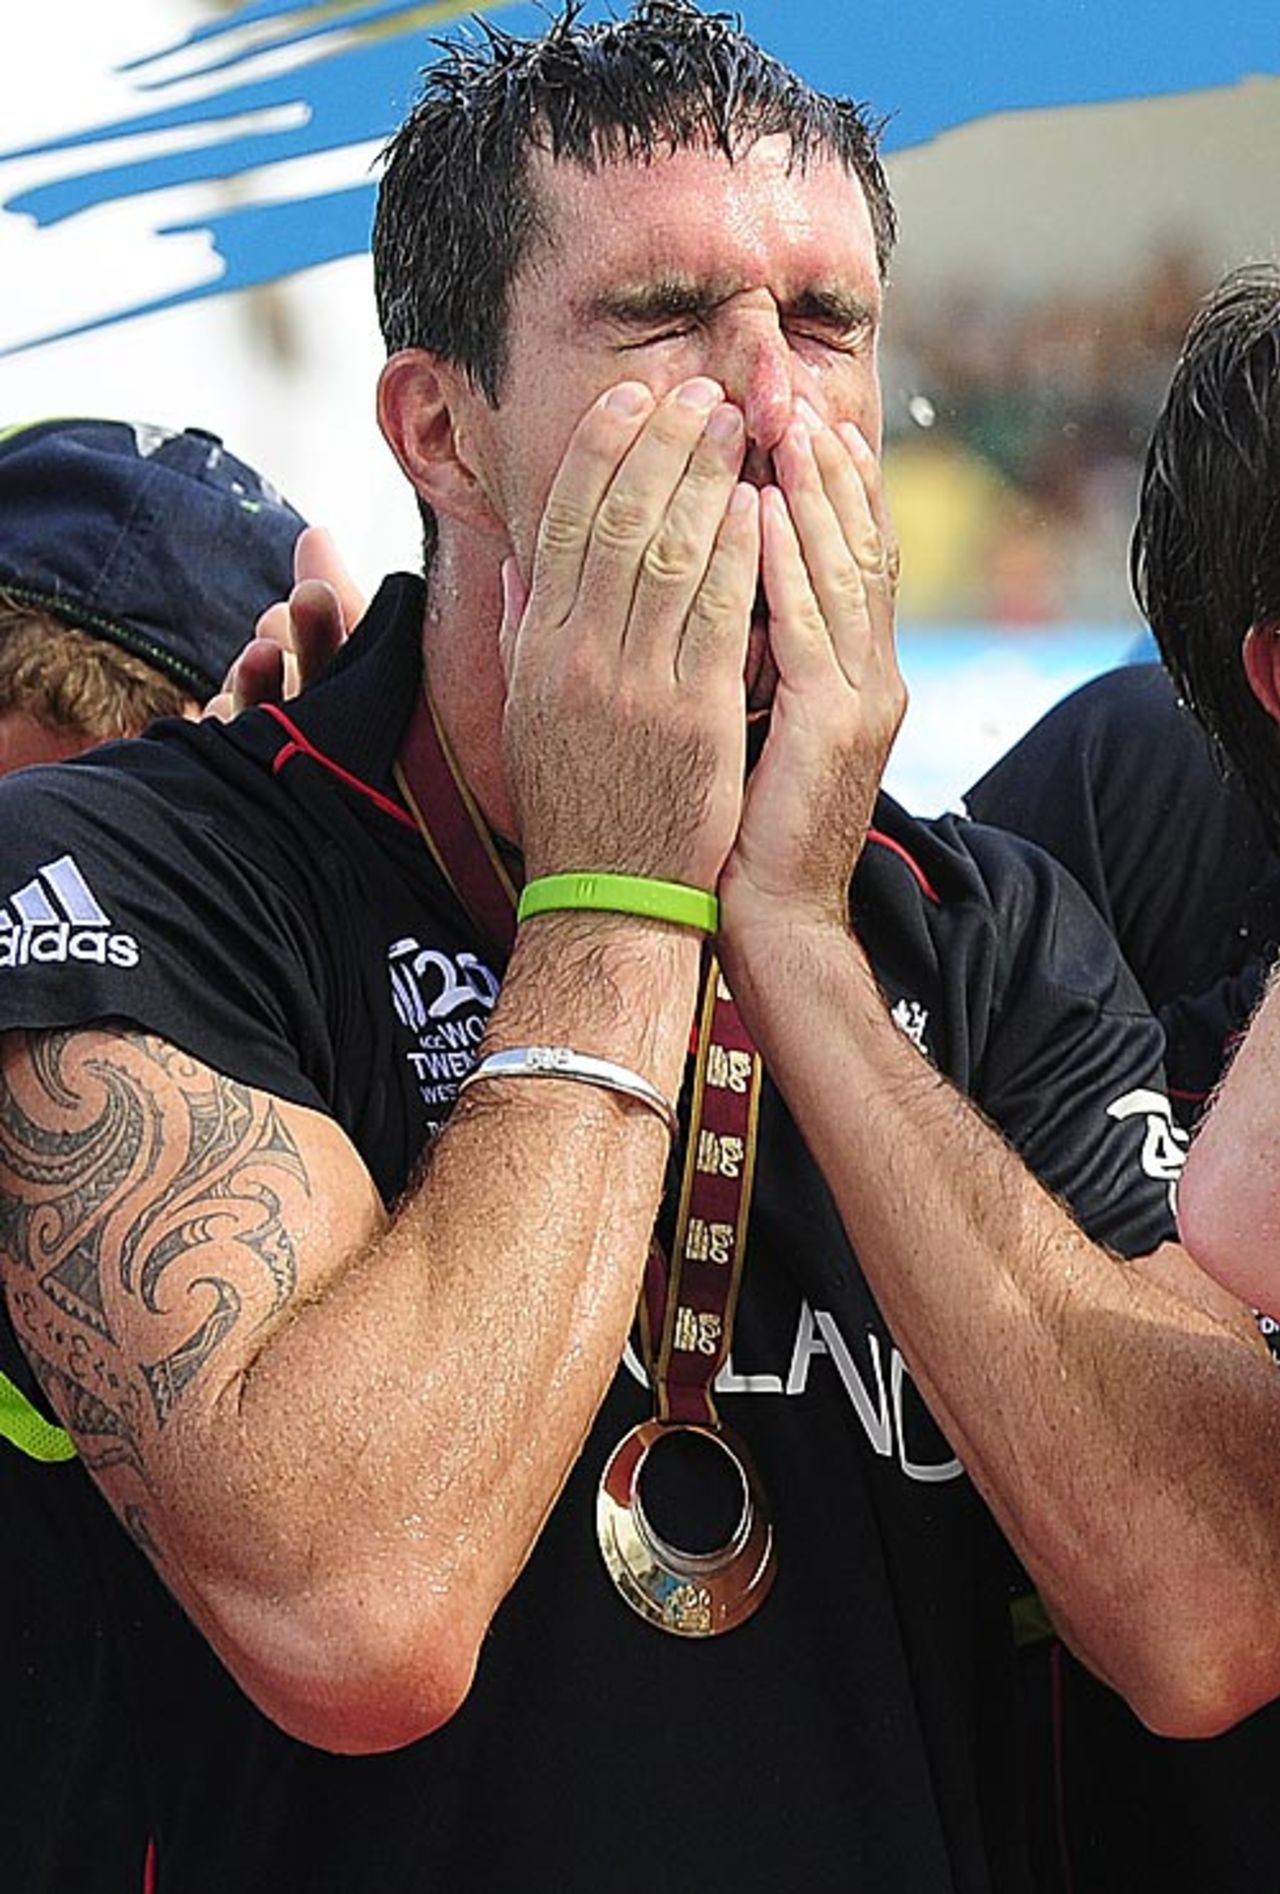 Kevin Pietersen is soaked in champagne, England v Australia, ICC World Twenty20 final, Barbados, May 16, 2010